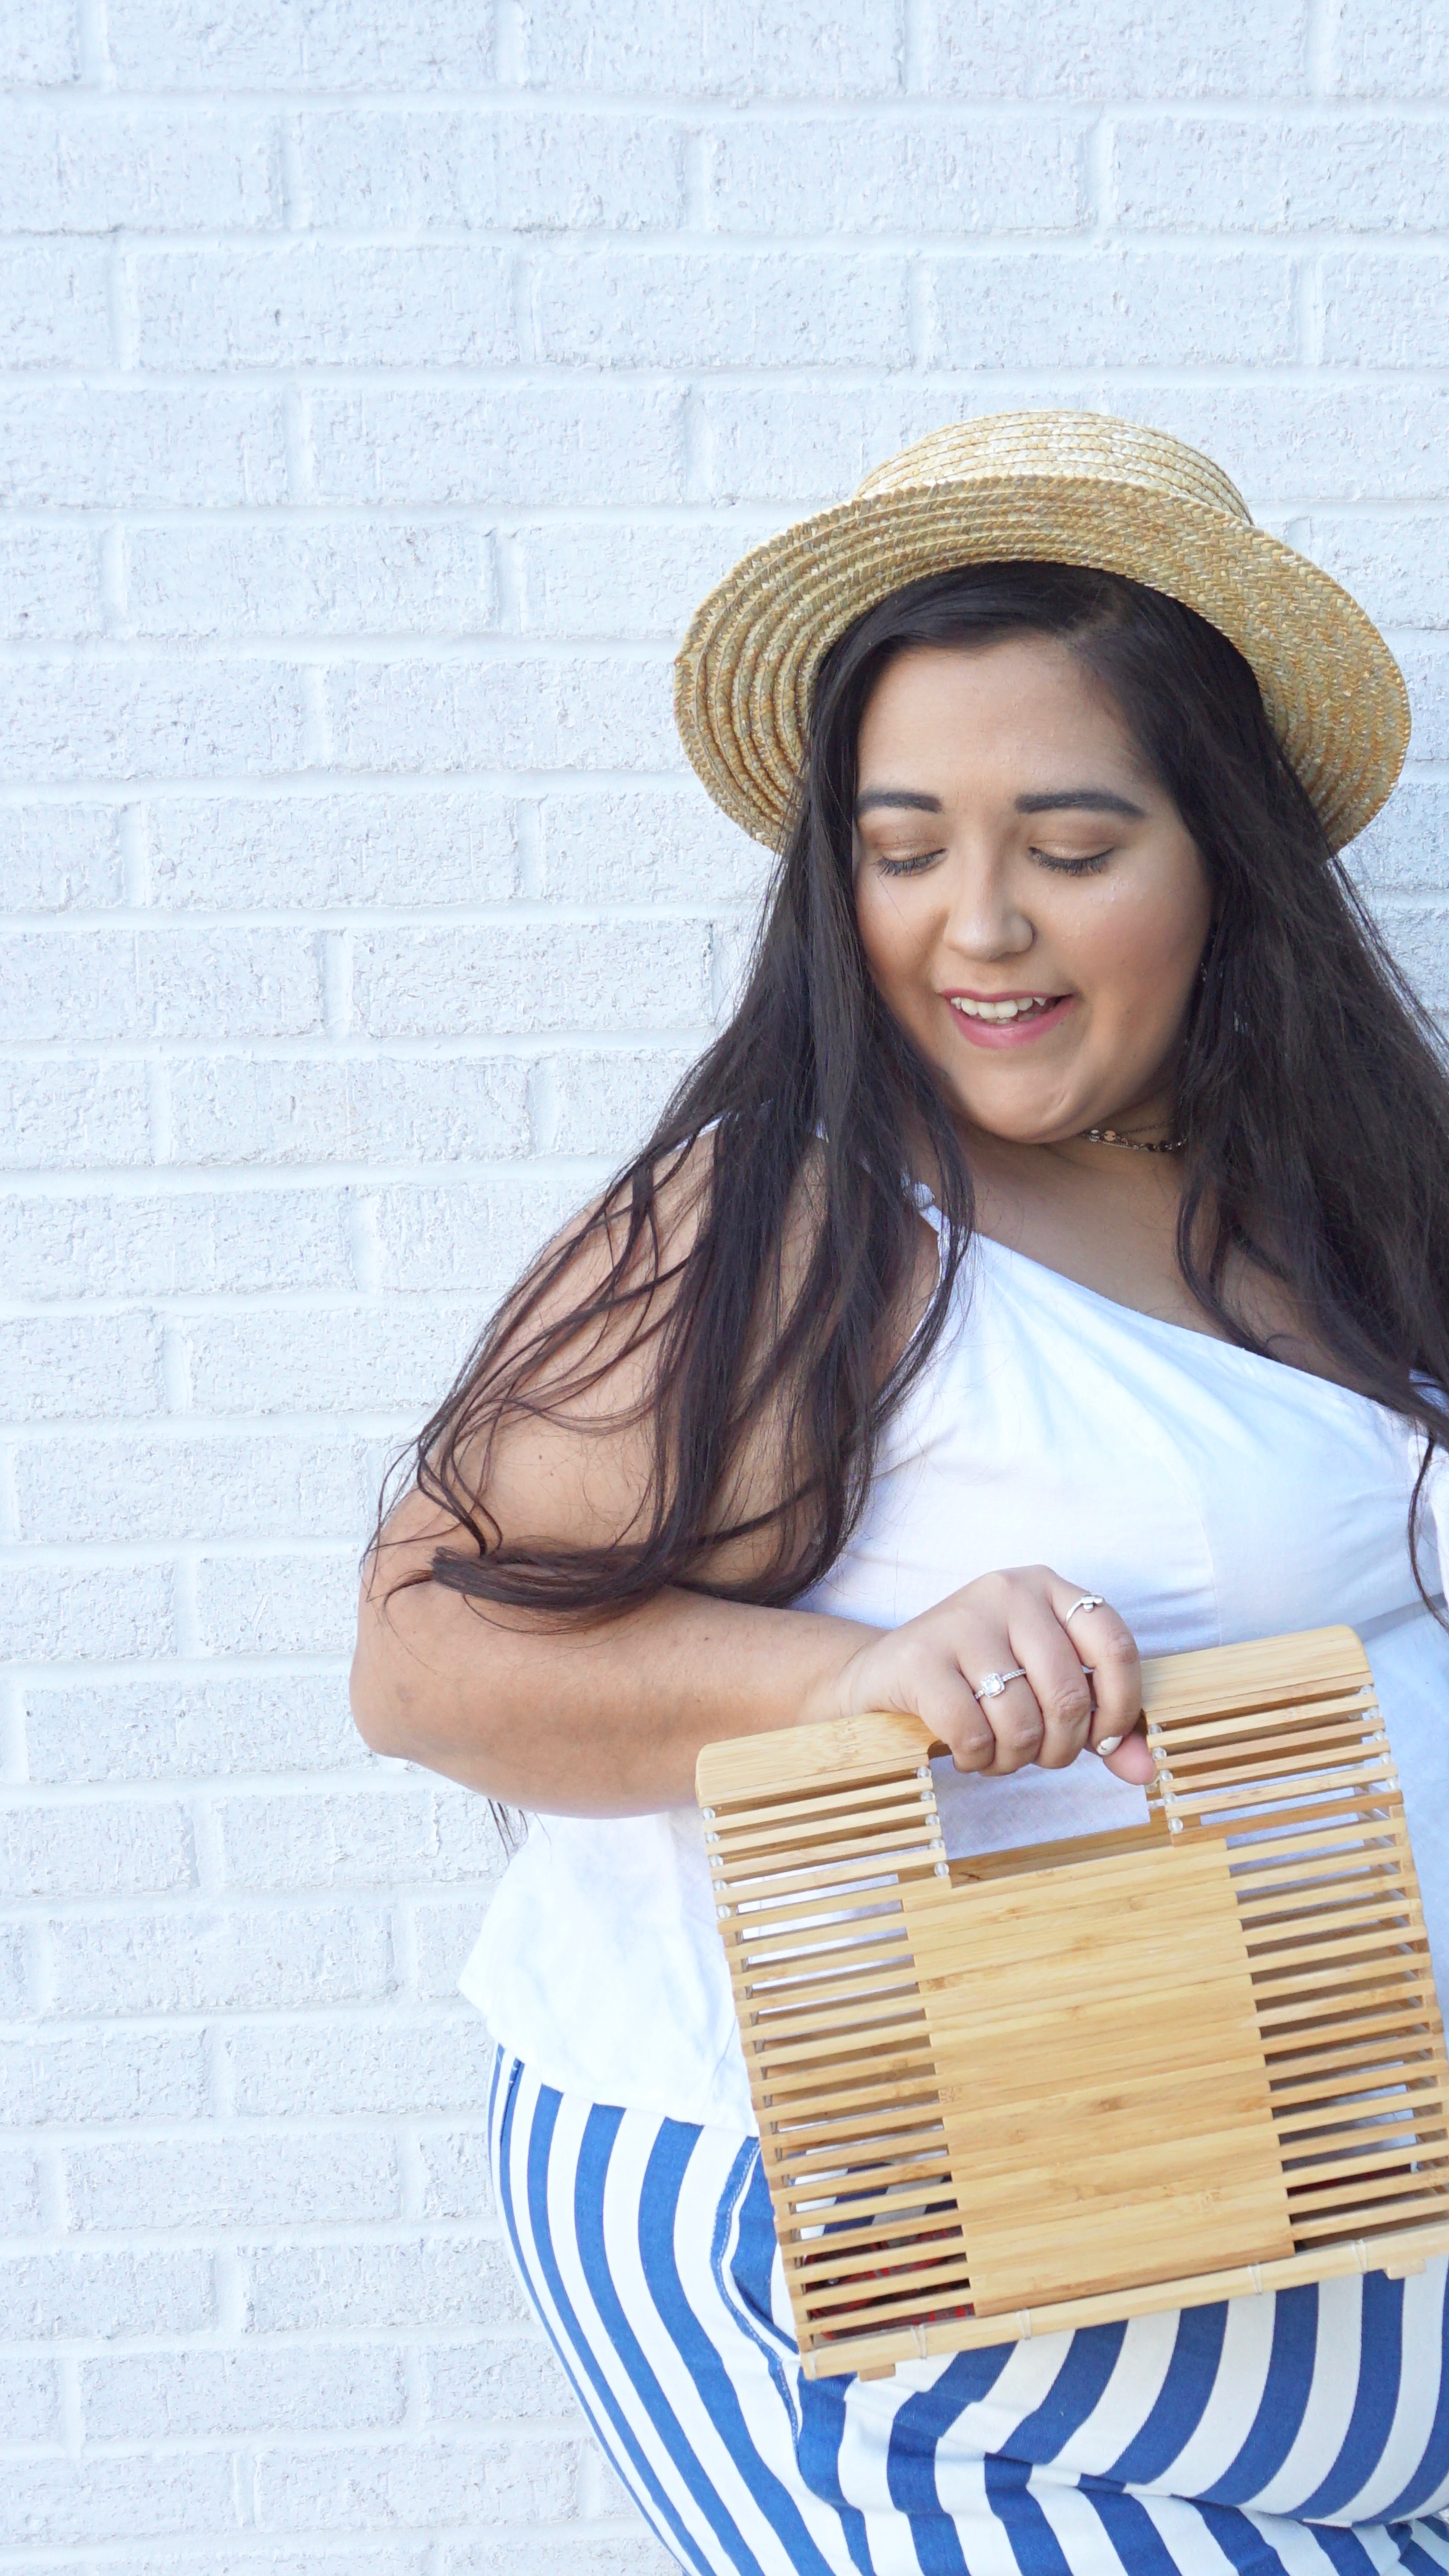 My Favorite Go-To Summer Look | Classic Blue & White Stripes